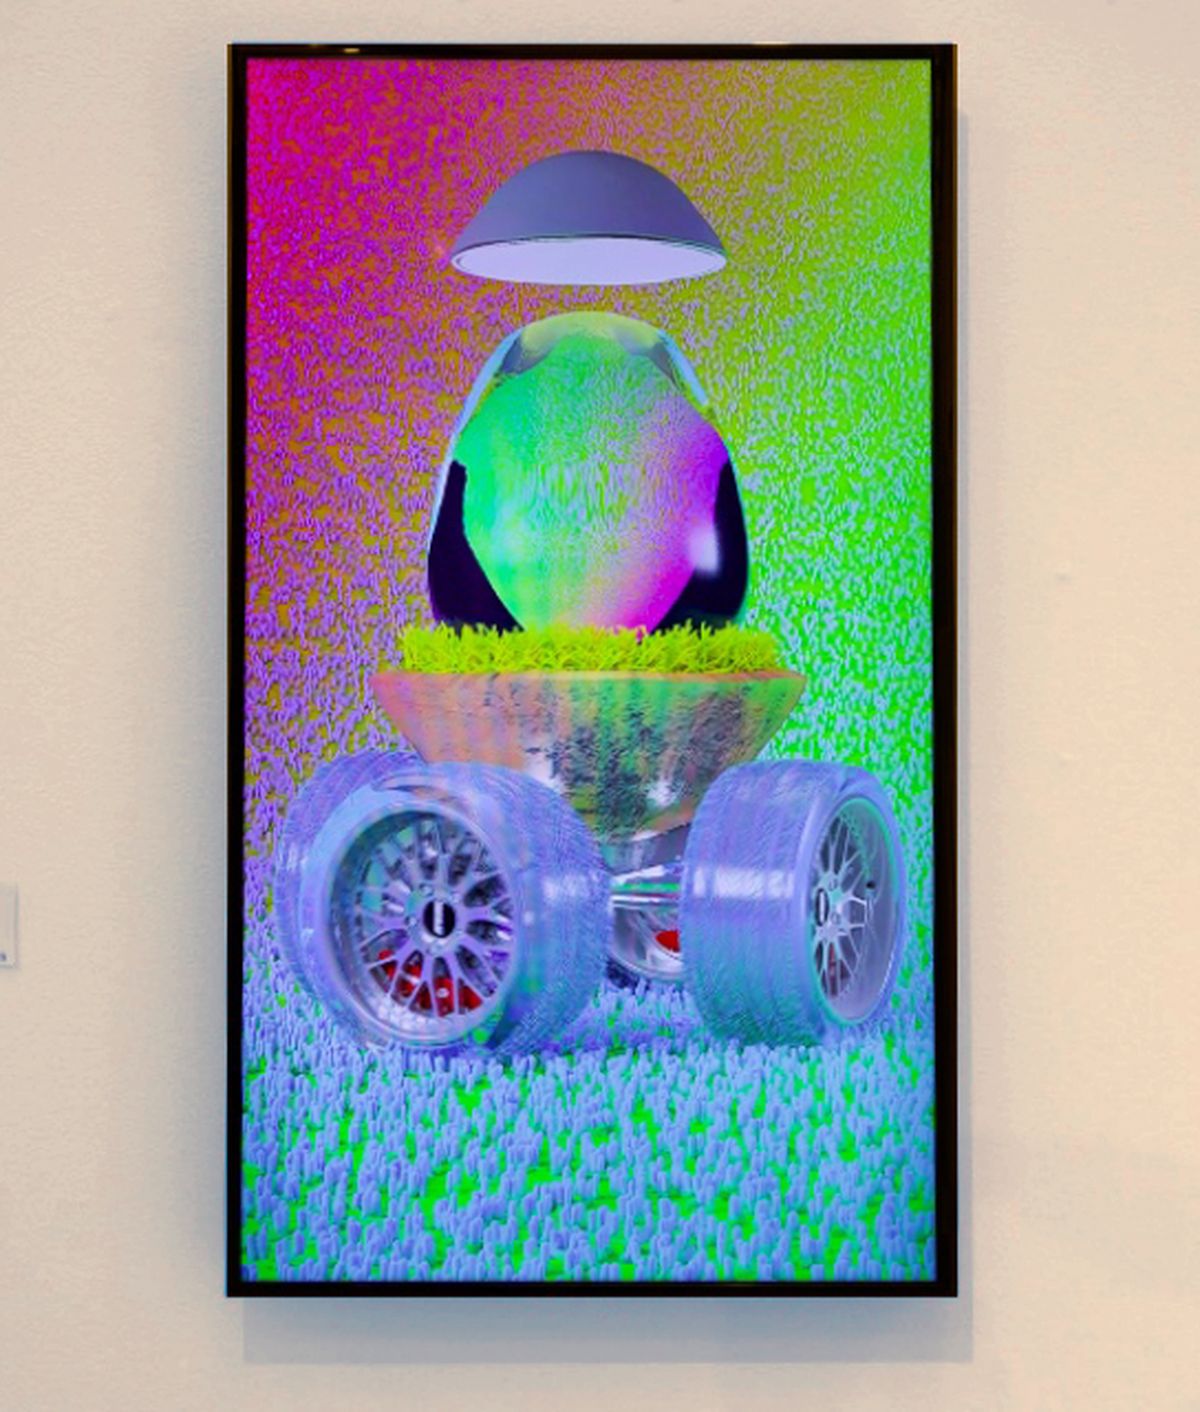 photo of a video screen showing a picture of a colourful egg on wheels